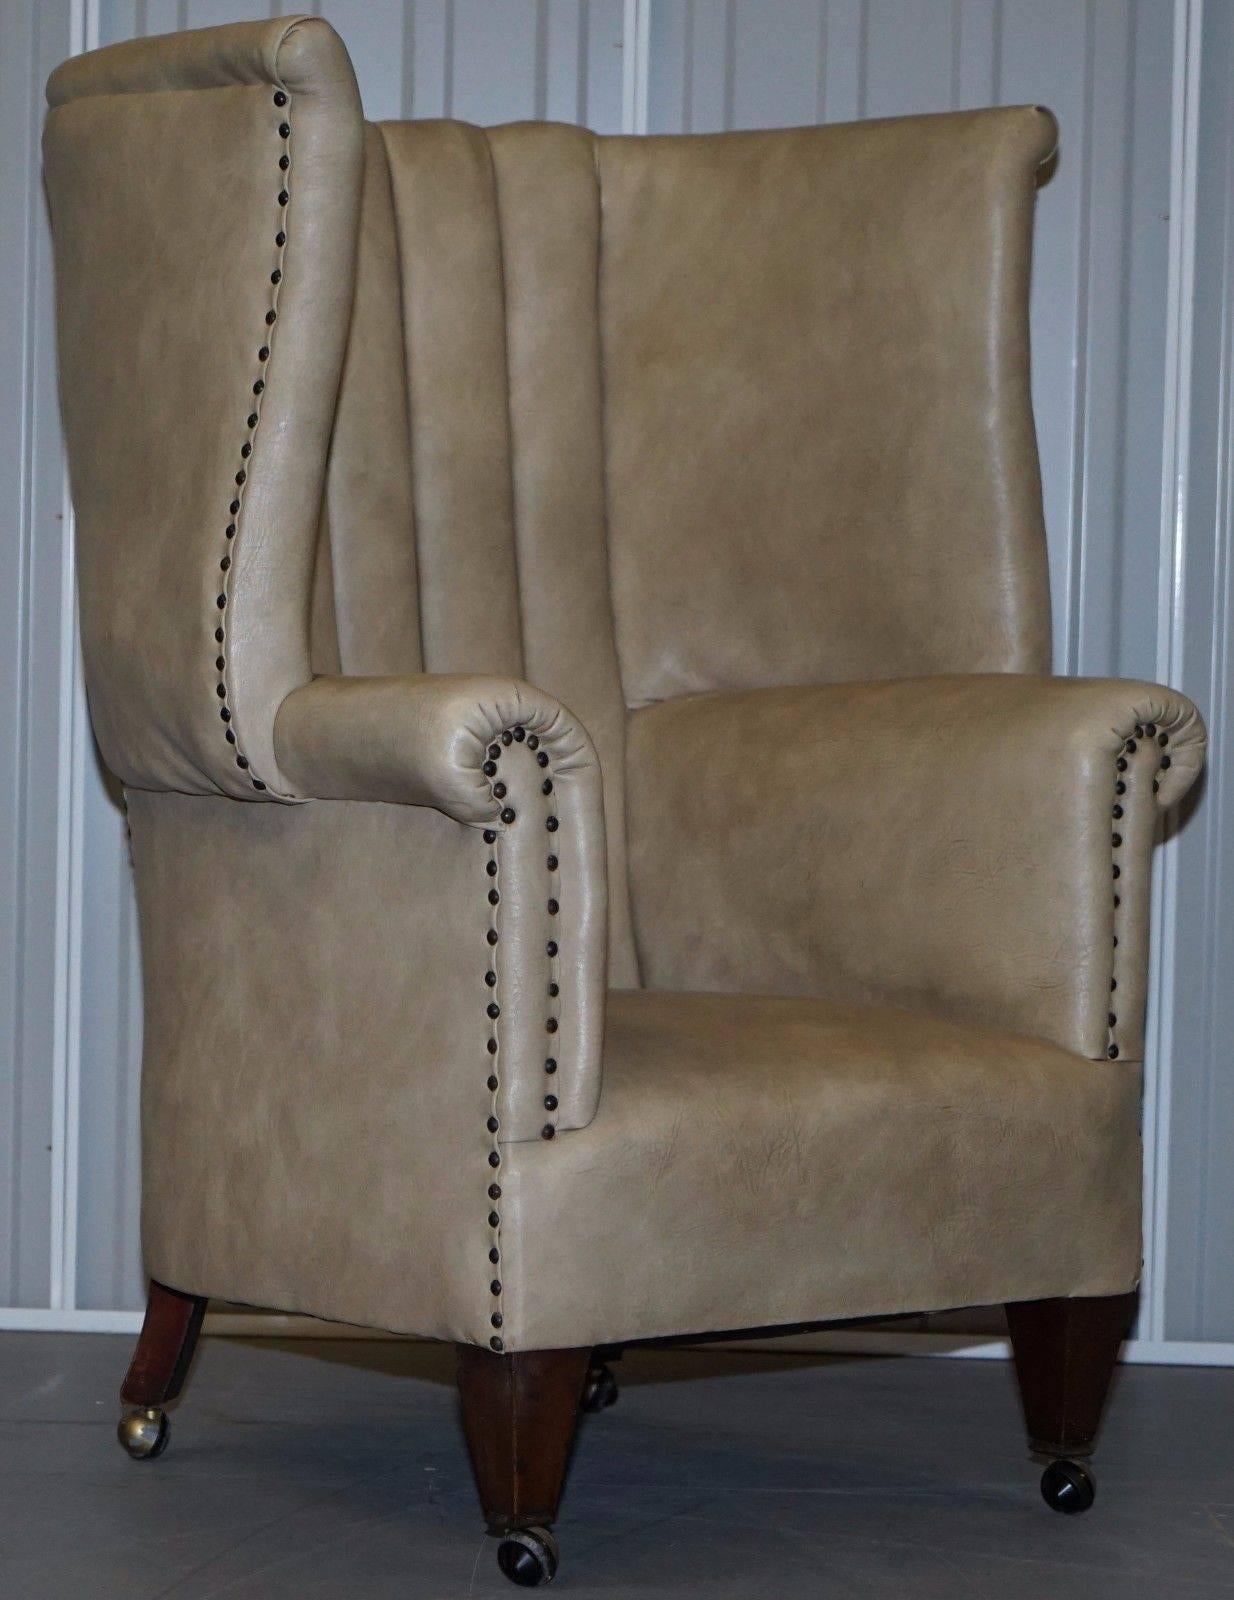 We are delighted to offer for sale this stunning original circa 1830 wingback porters chair in solid mahogany with faux leather upholstery 

A really rare find and with very desirable proportions, the back is barrel to offer ample room, wingback